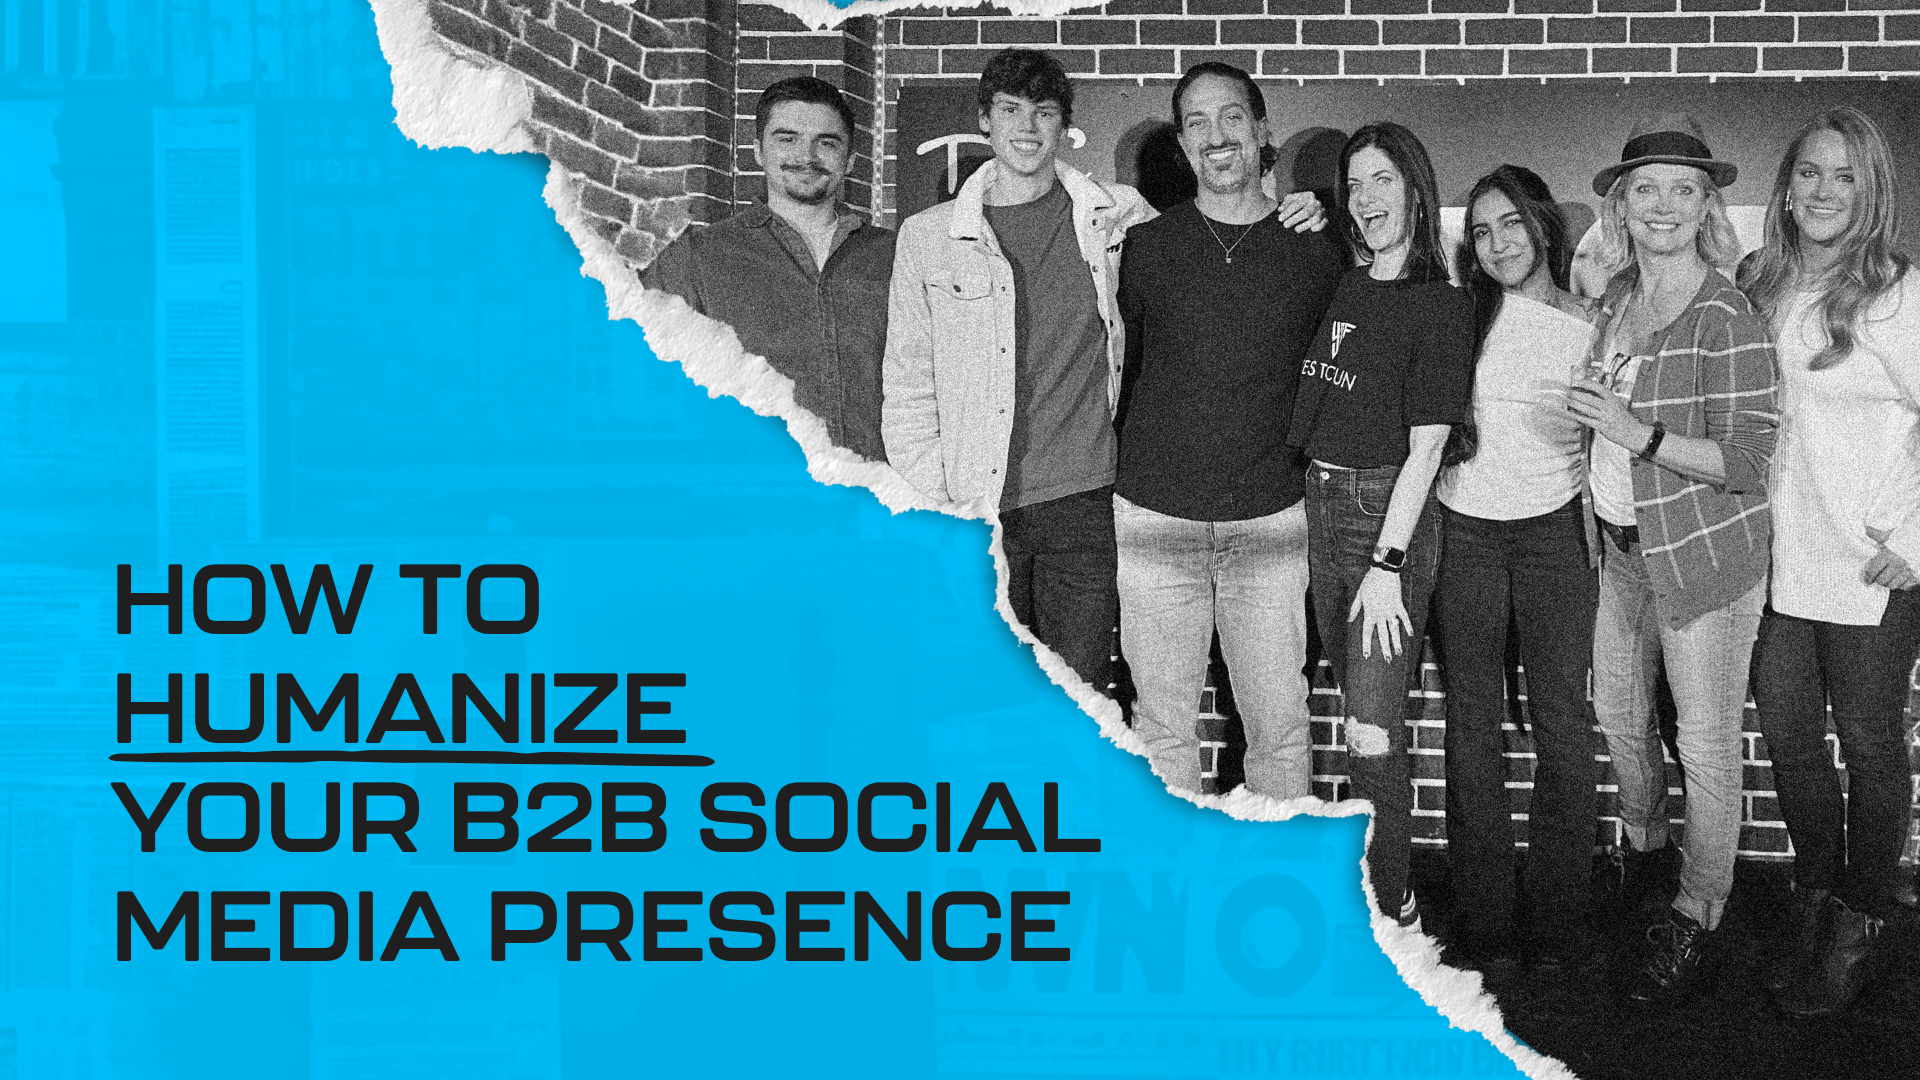 How to Humanize Your B2B Social Media Presence